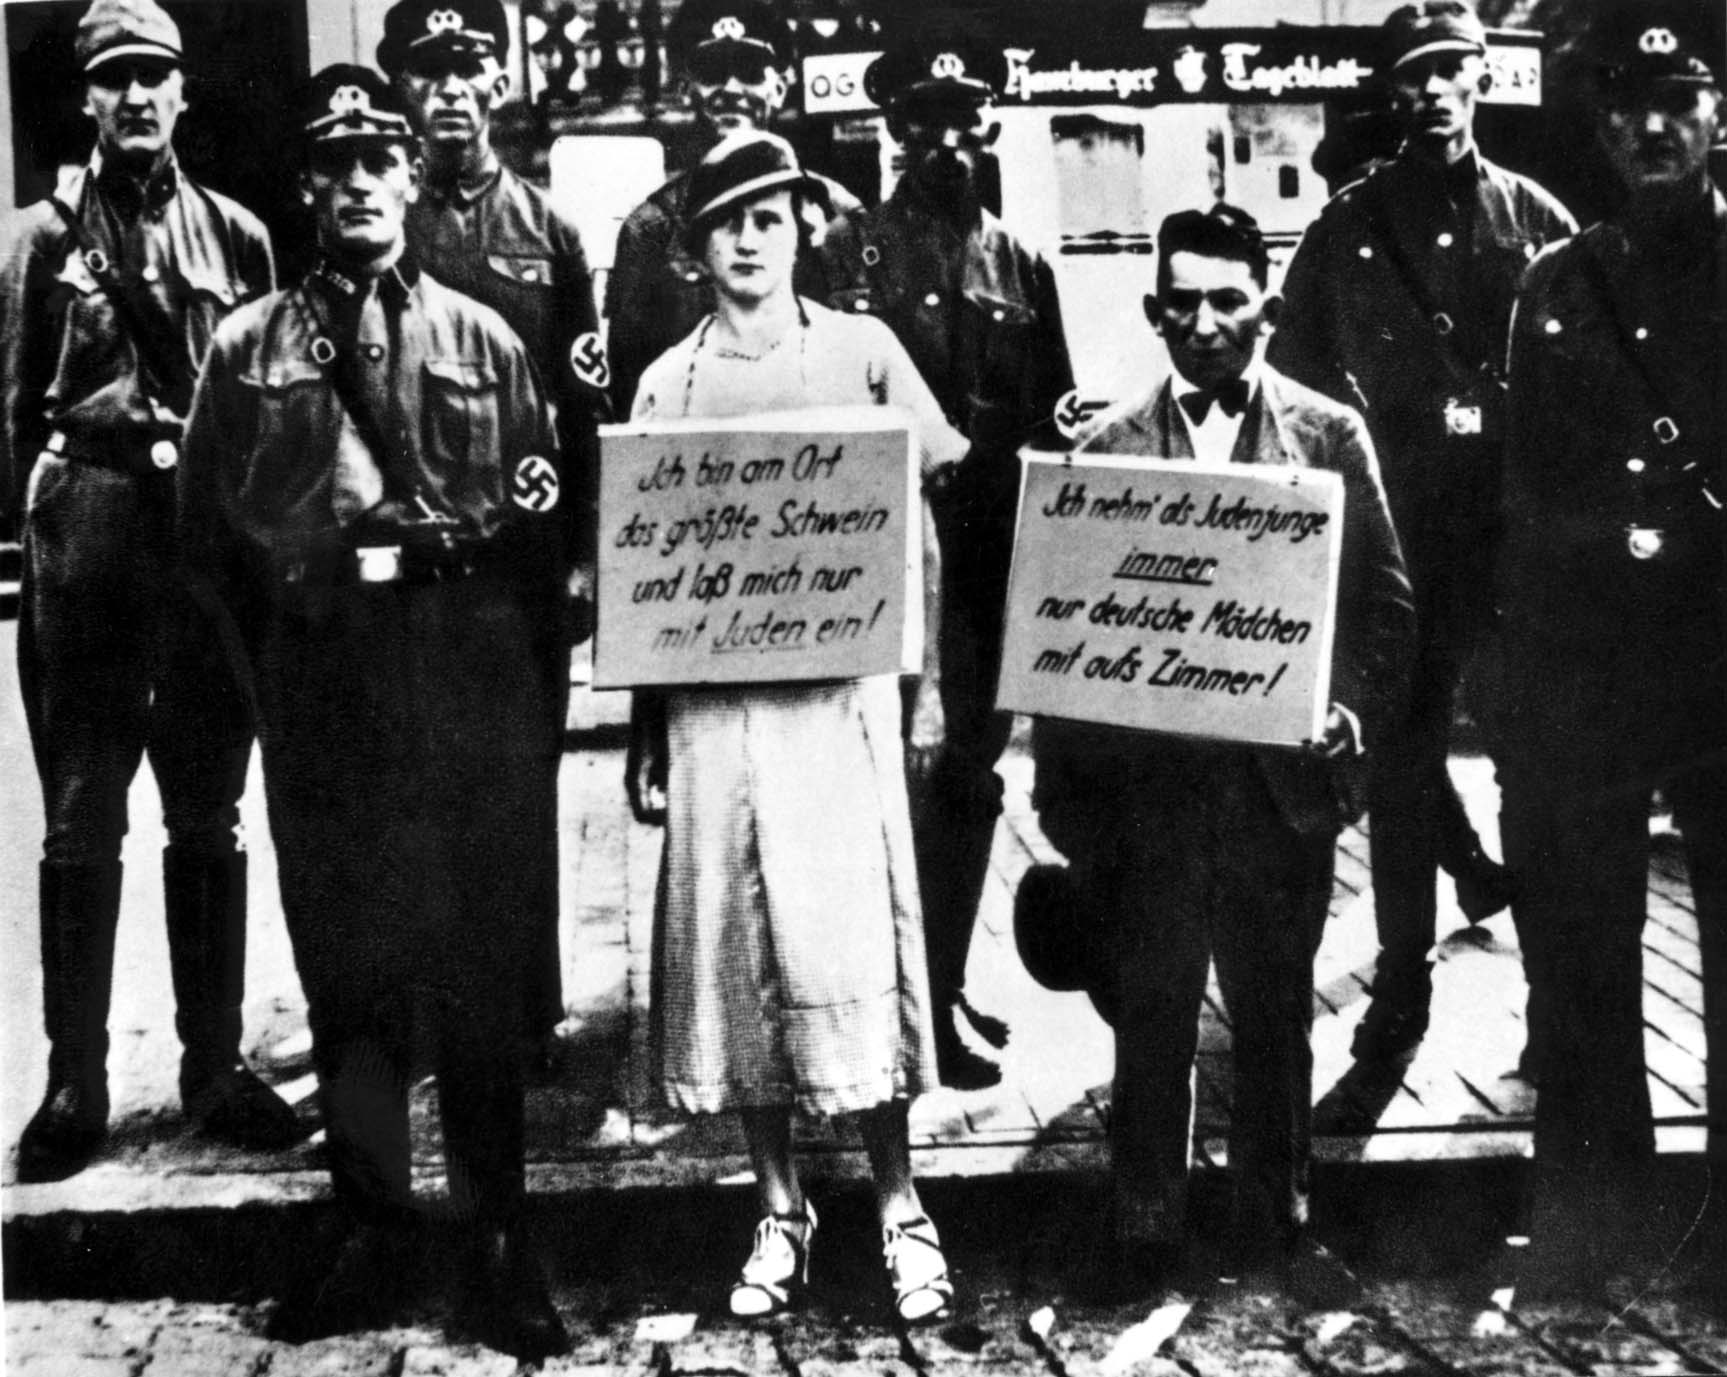 A man and a woman standing in the street, with signs hanging from their chests. They are elegantly dressed, the man in a suit, the woman in a dress and wearing a hat. Behind them are men in uniforms with swastikas on their shoulders.